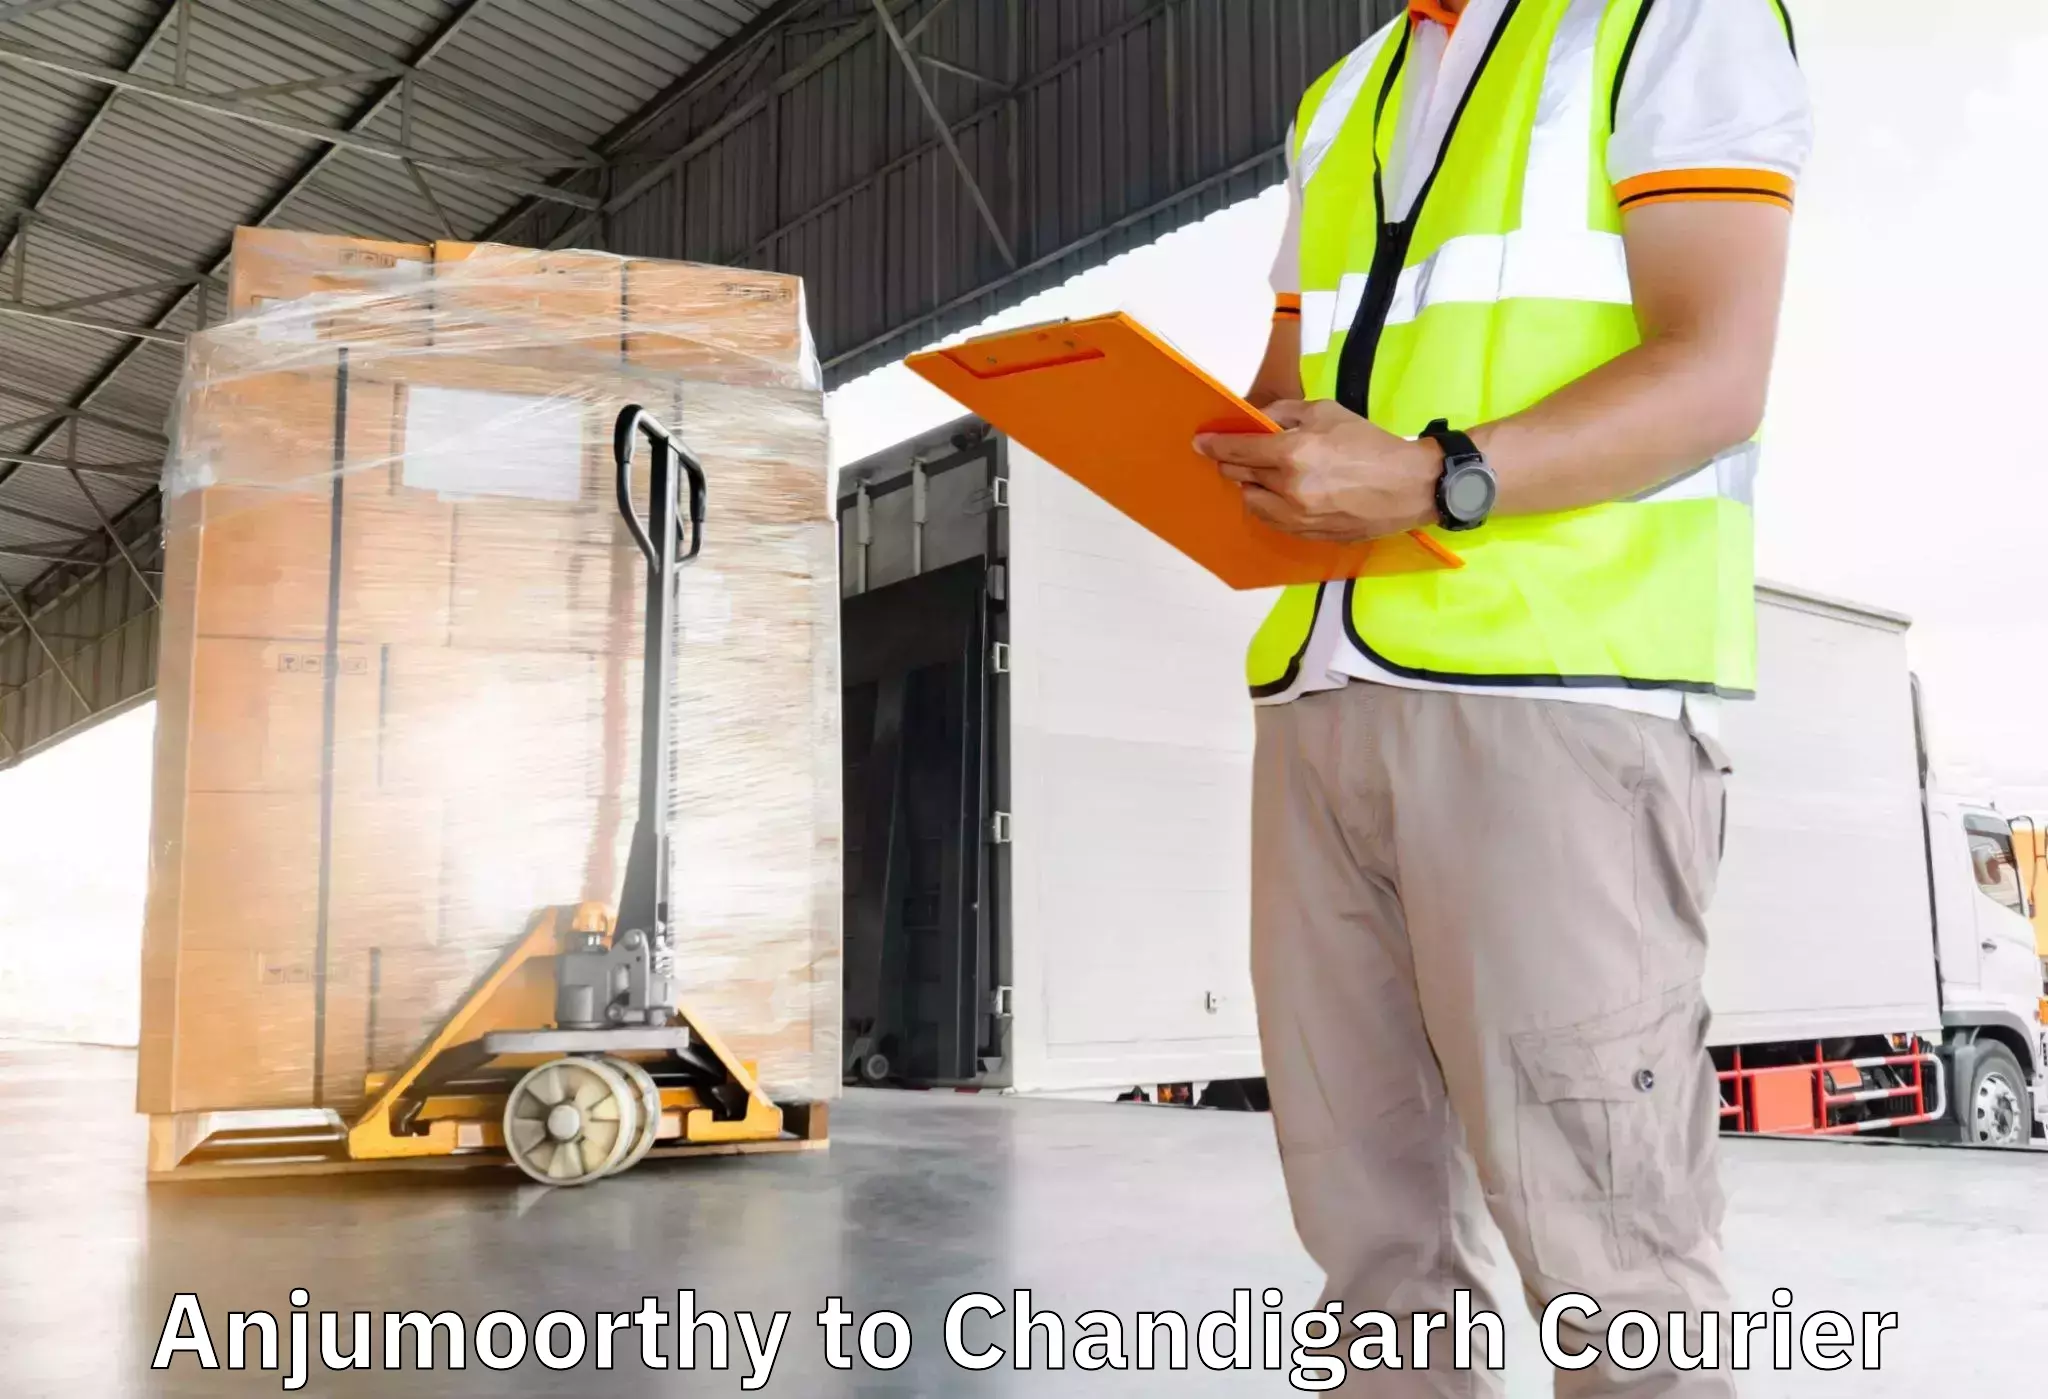 Furniture delivery service Anjumoorthy to Kharar